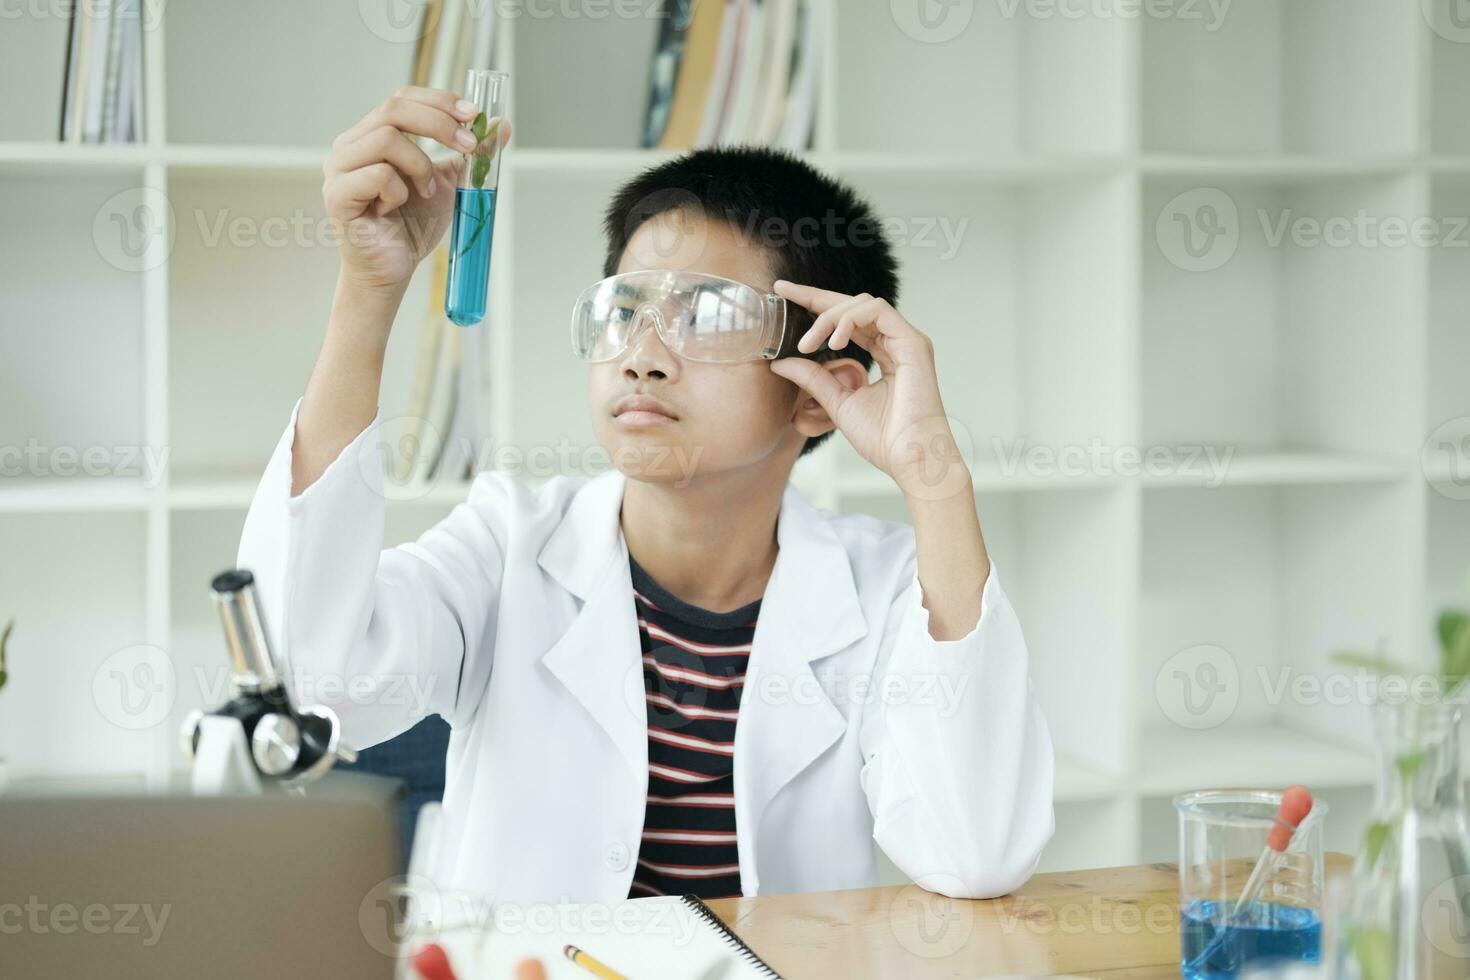 Young Scientists in Action Kids Conduct Chemistry Experiment in School Laboratory photo